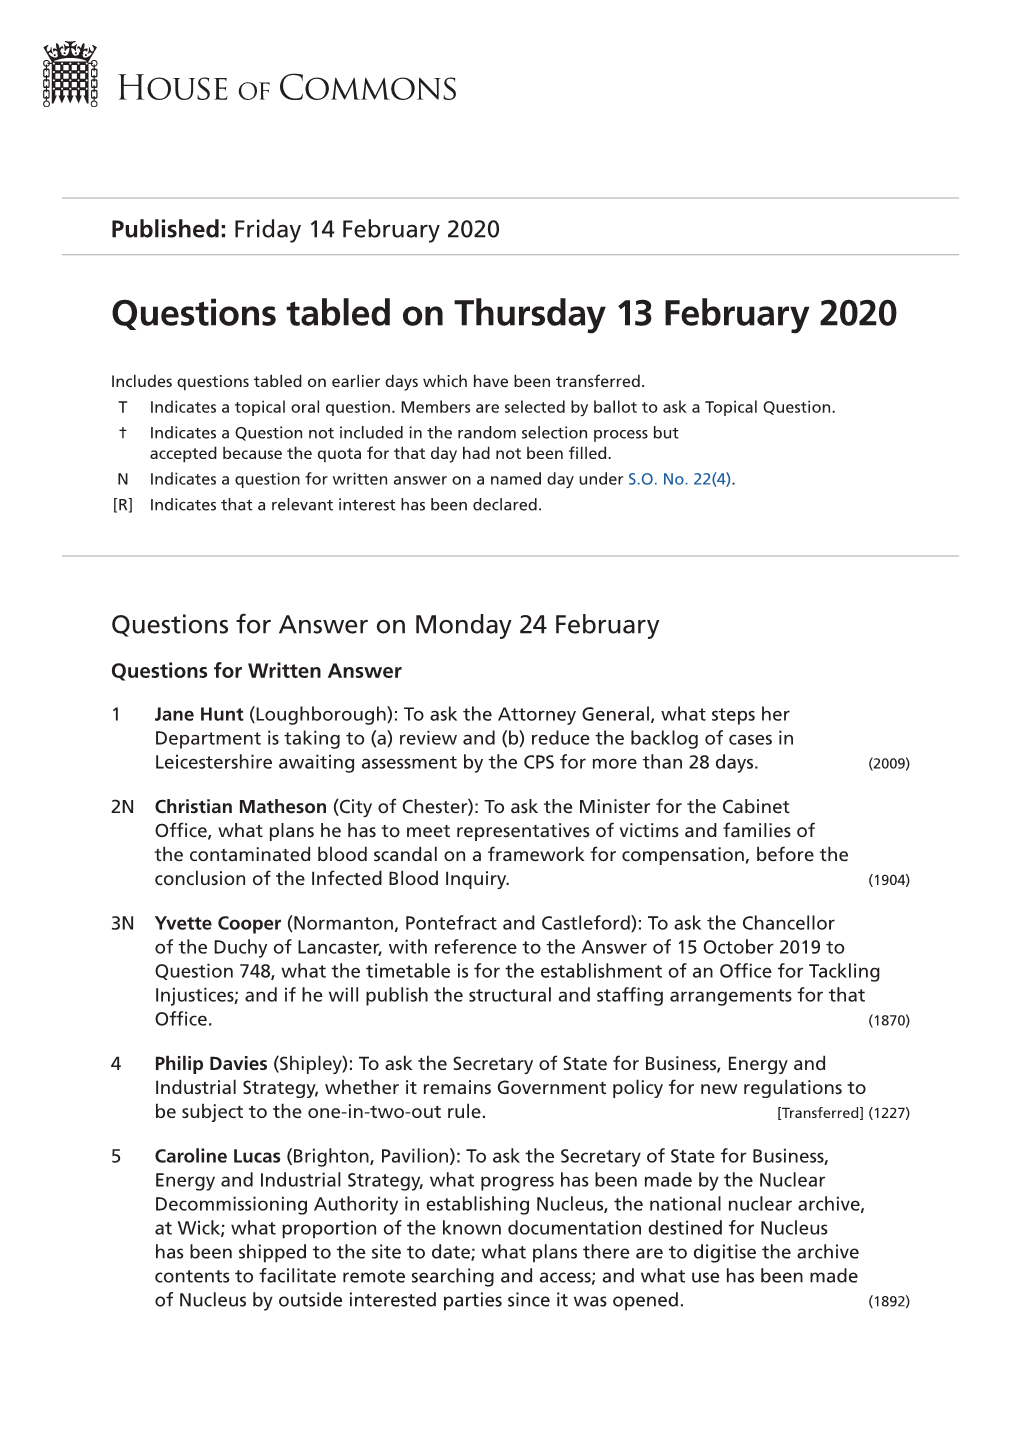 Questions Tabled on Thu 13 Feb 2020